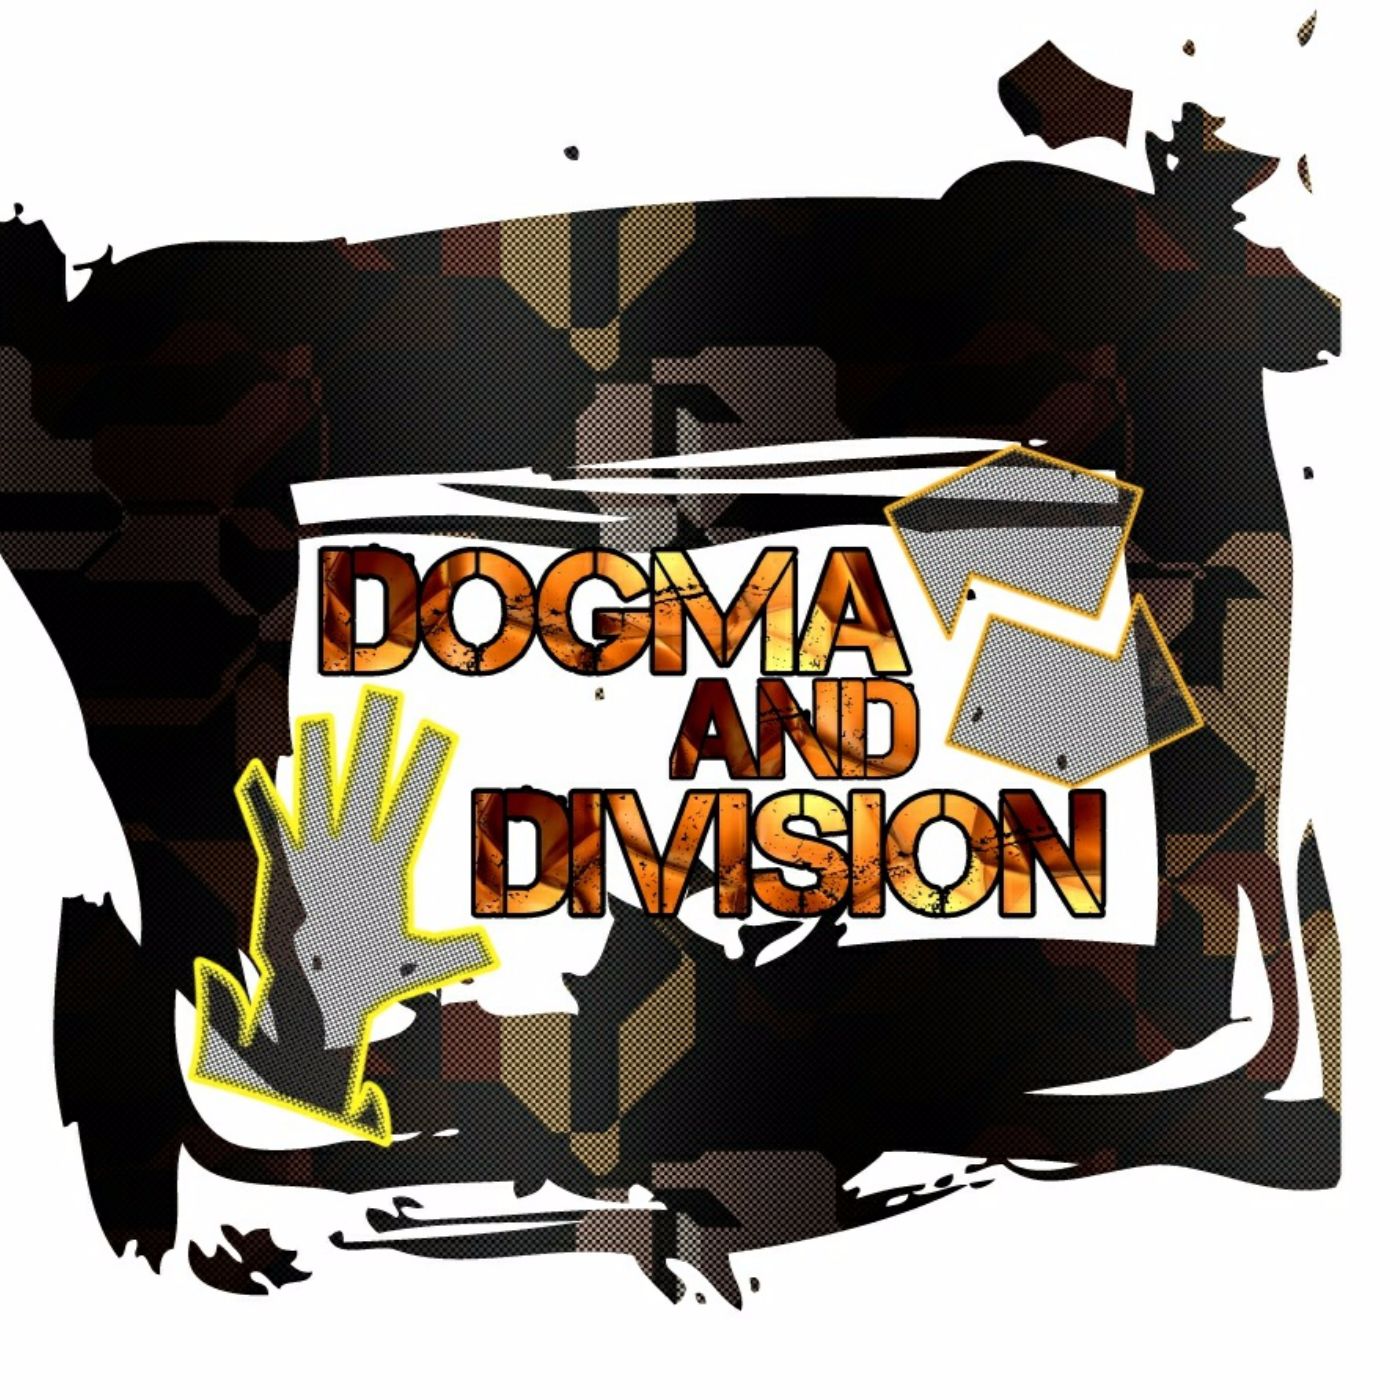 Dogma and Division